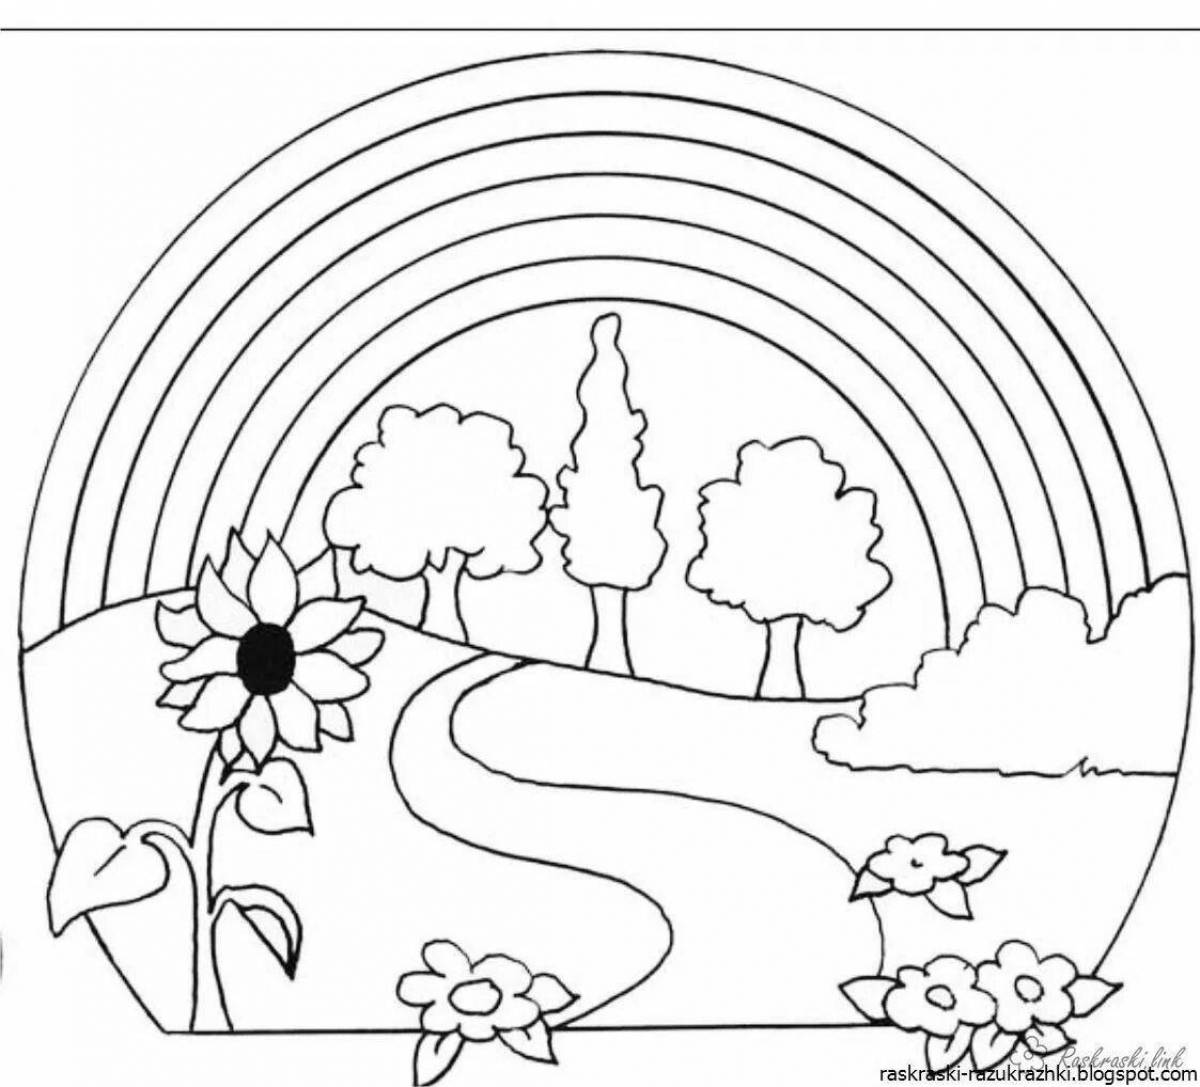 Great coloring book for kids russian nature